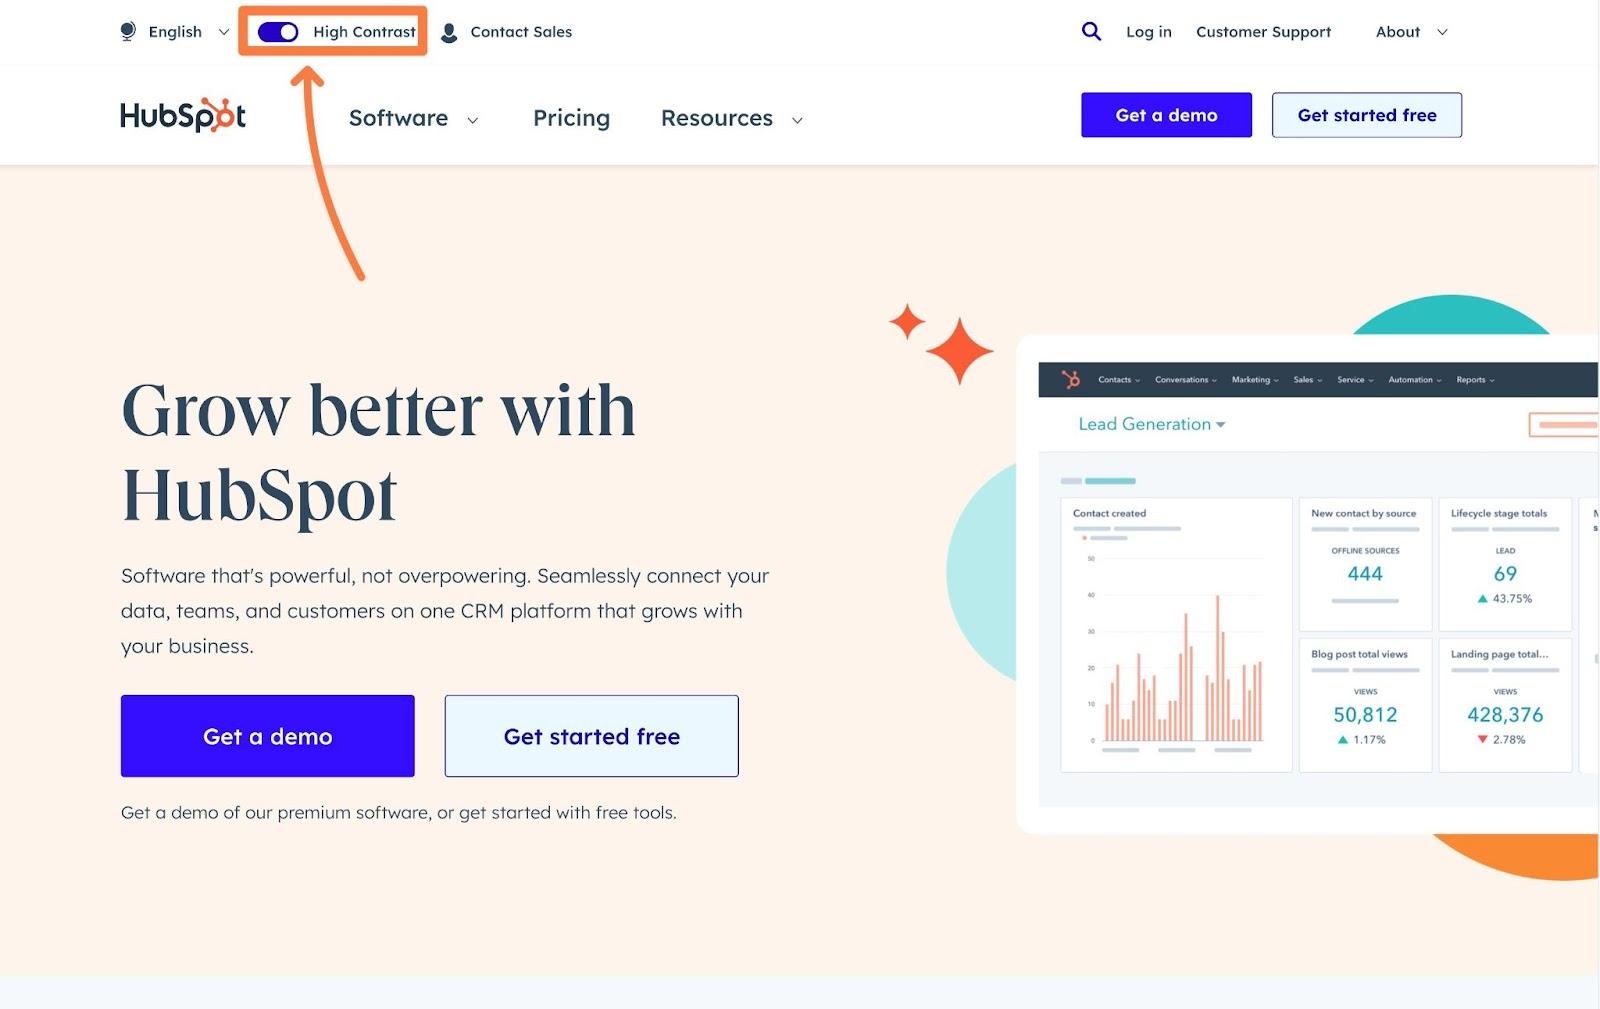 HubSpot’s High Contrast website option allows an accessible experience for users whose vision requires a more high contrast design.